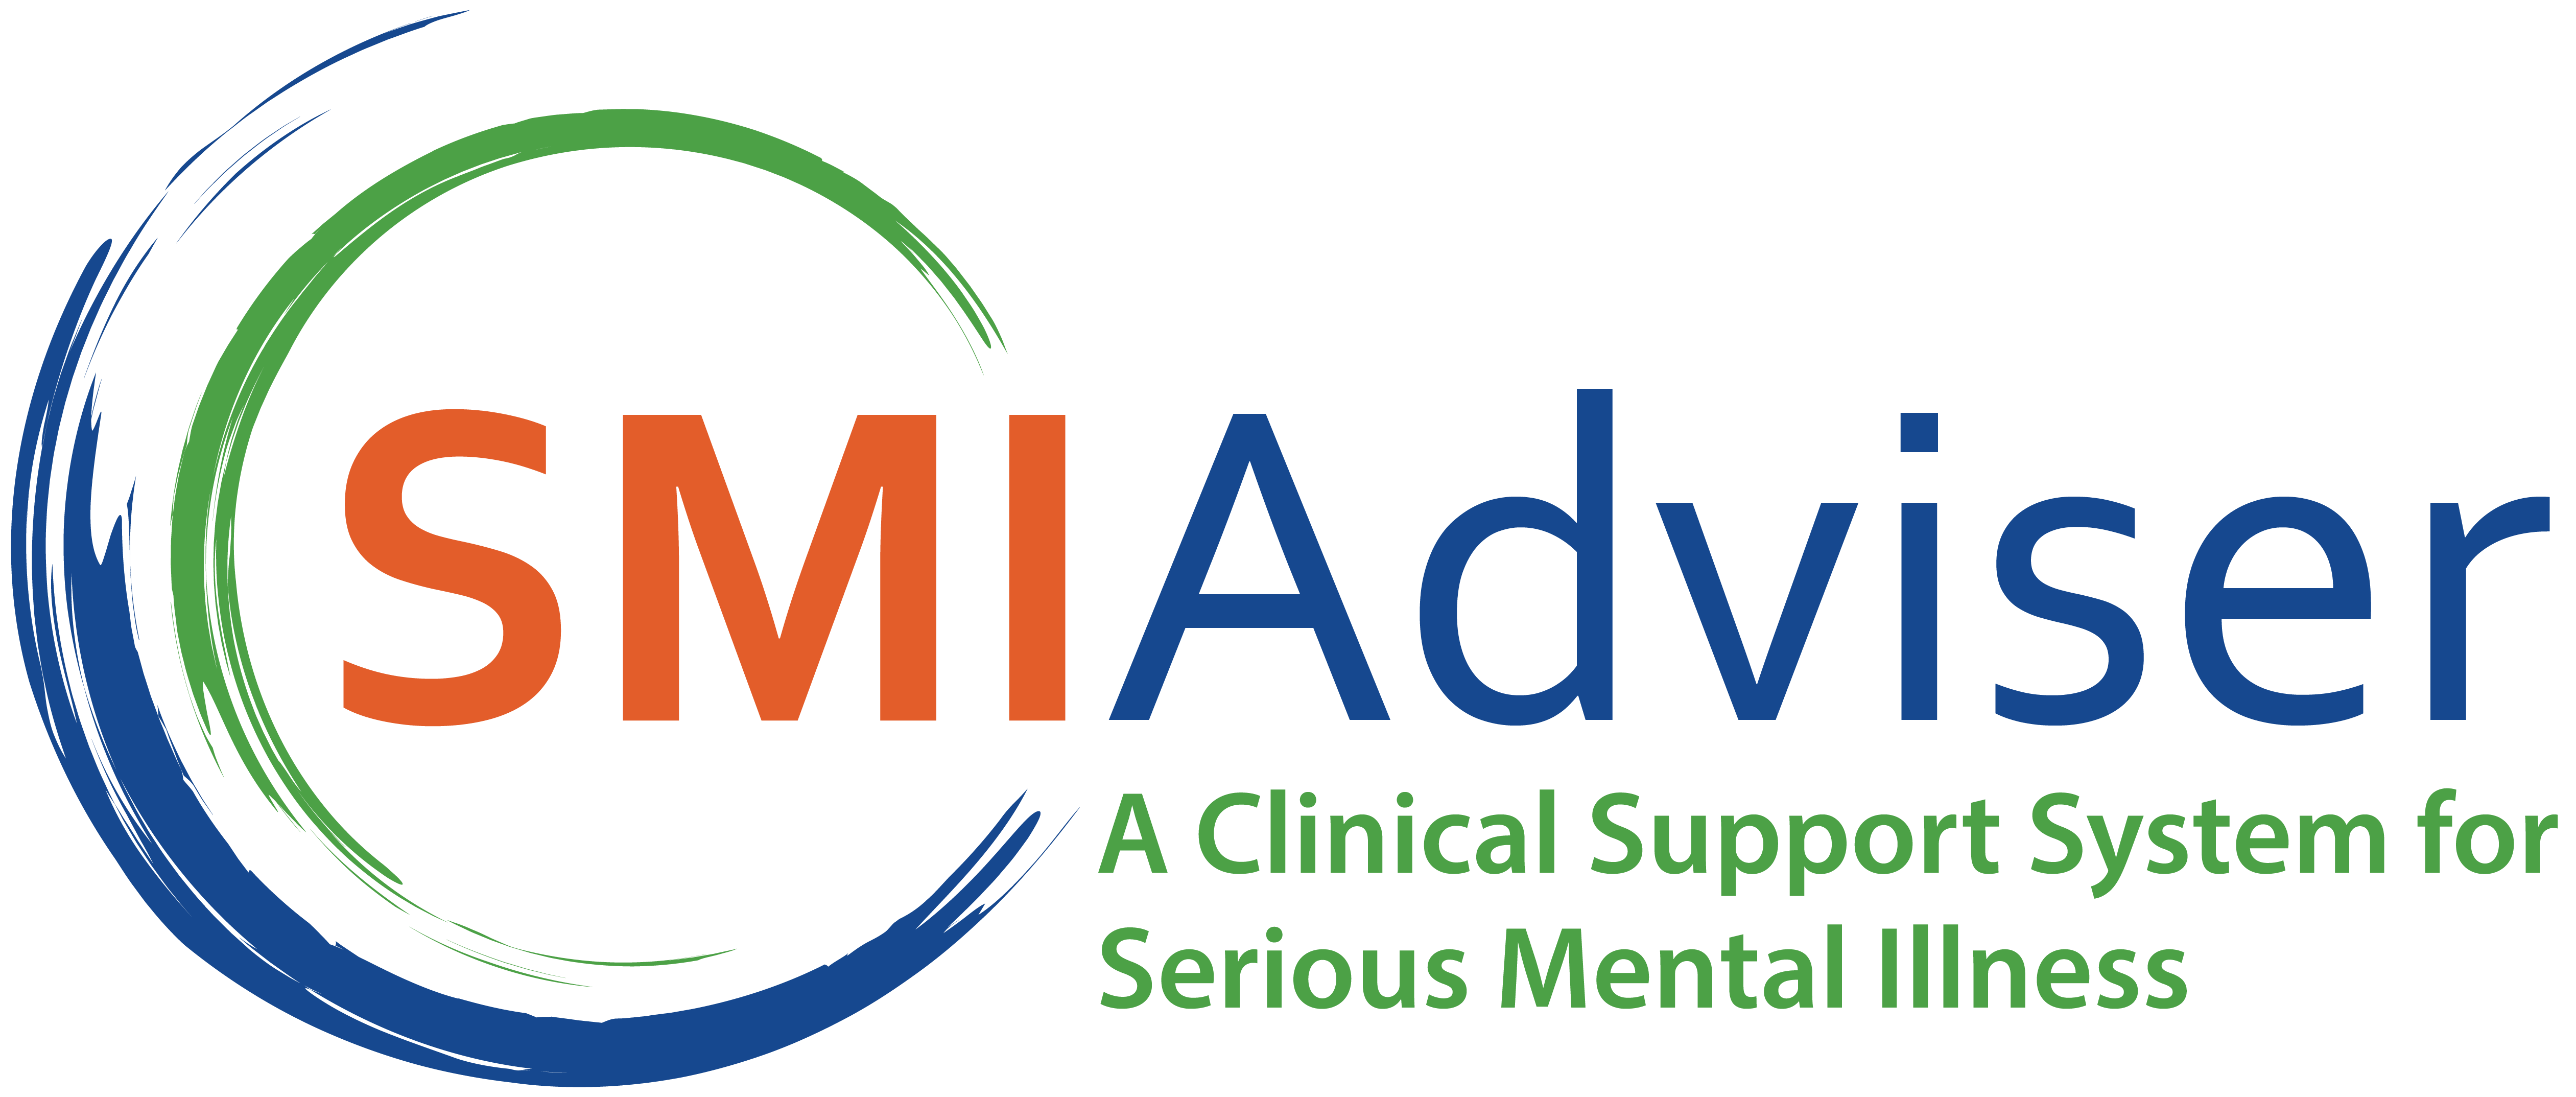 SMI Advisor - A Clinical Support System for Serious Mental Illness